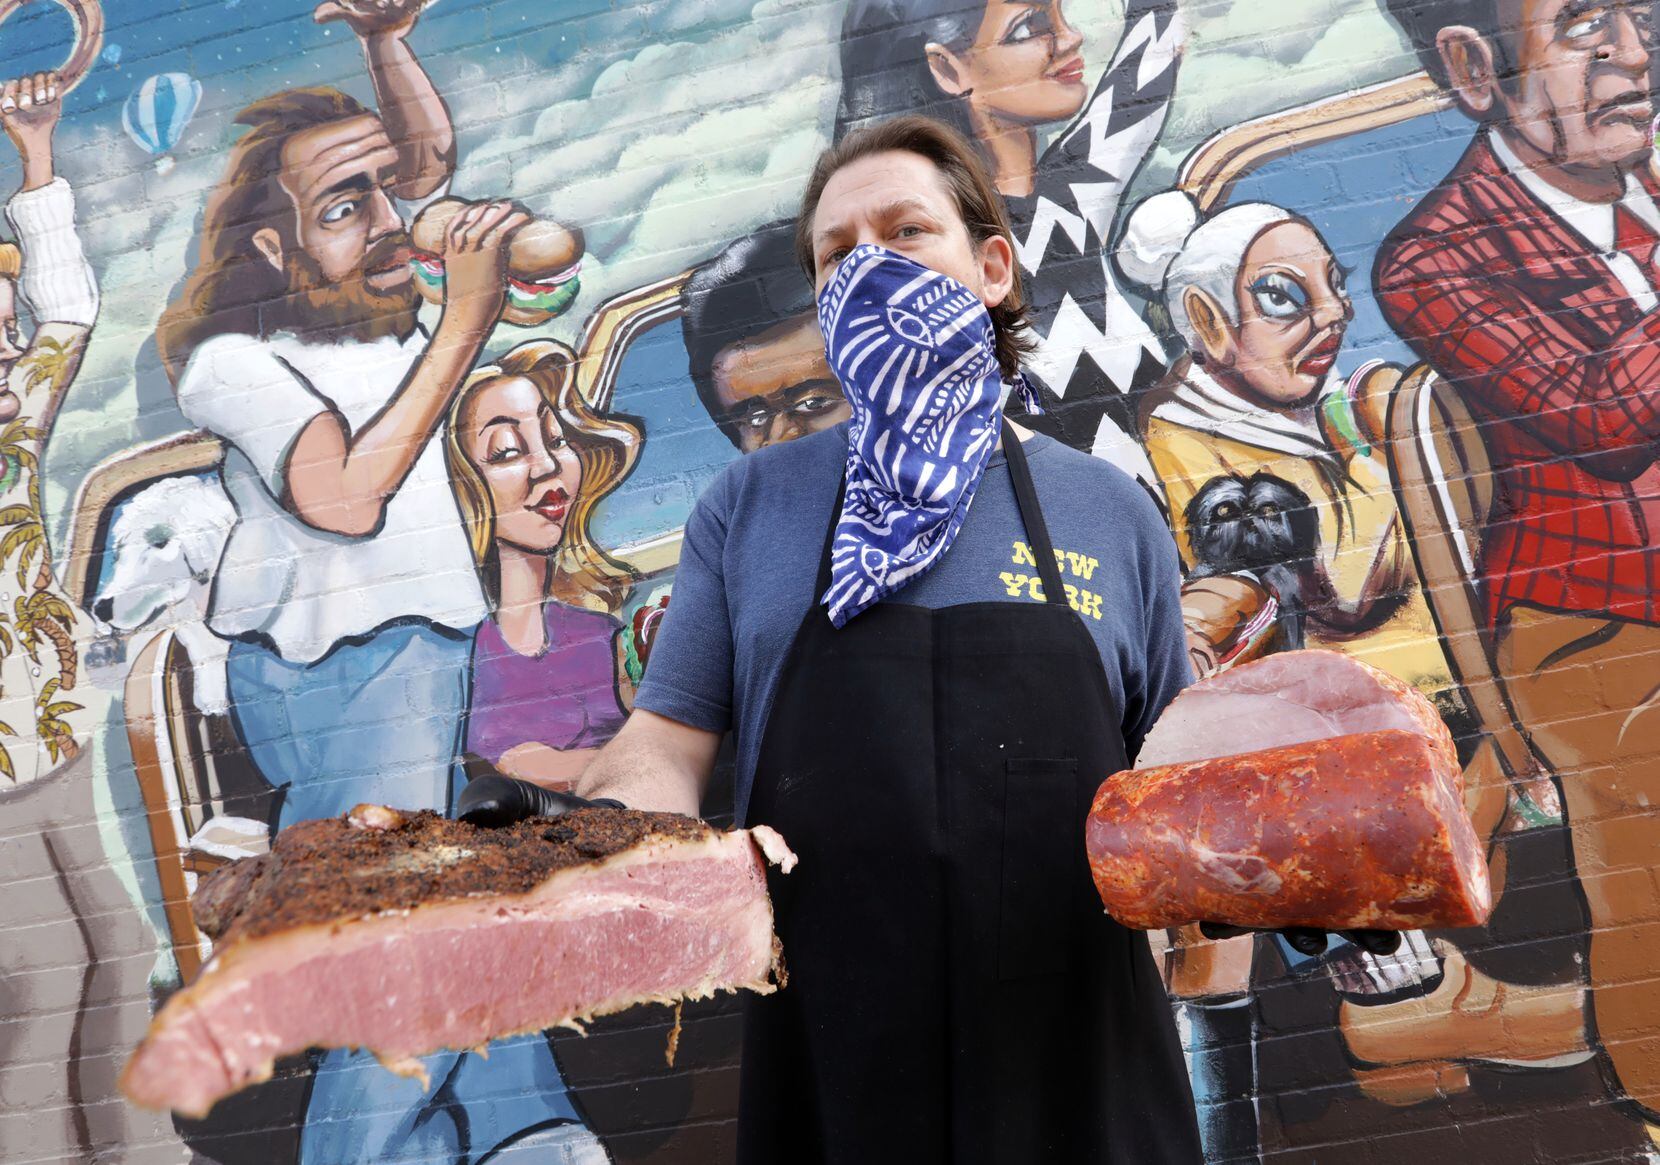 Andrew Kelley poses for a photograph at New York Sub in Dallas, TX, on Nov. 4, 2020. (Jason Janik/Special Contributor)